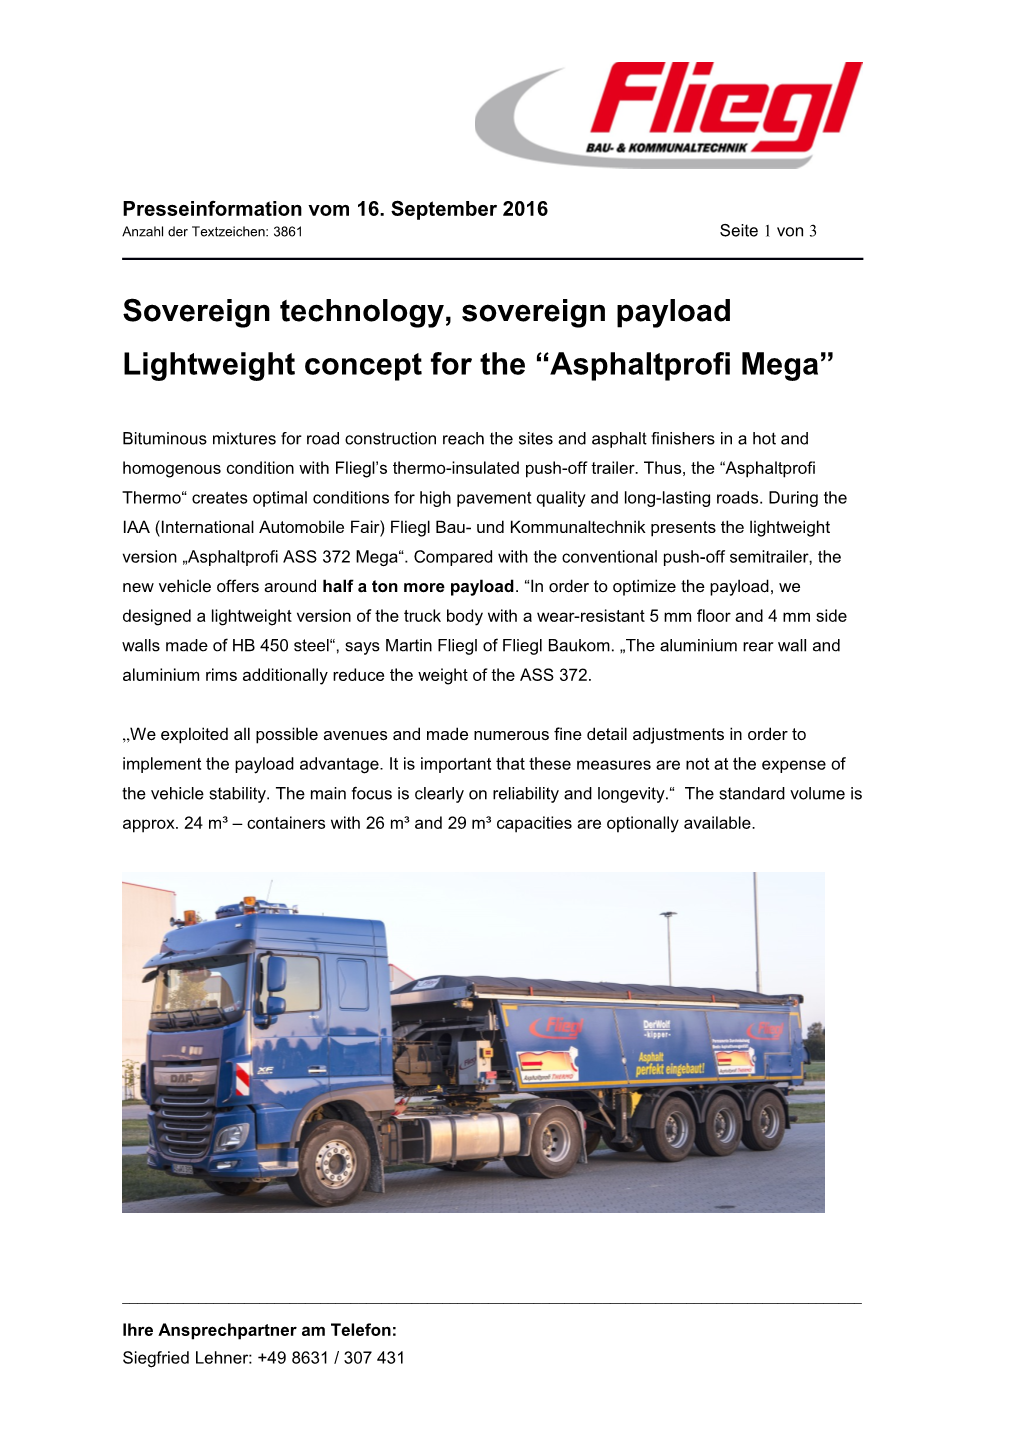 Sovereign Technology, Sovereign Payload